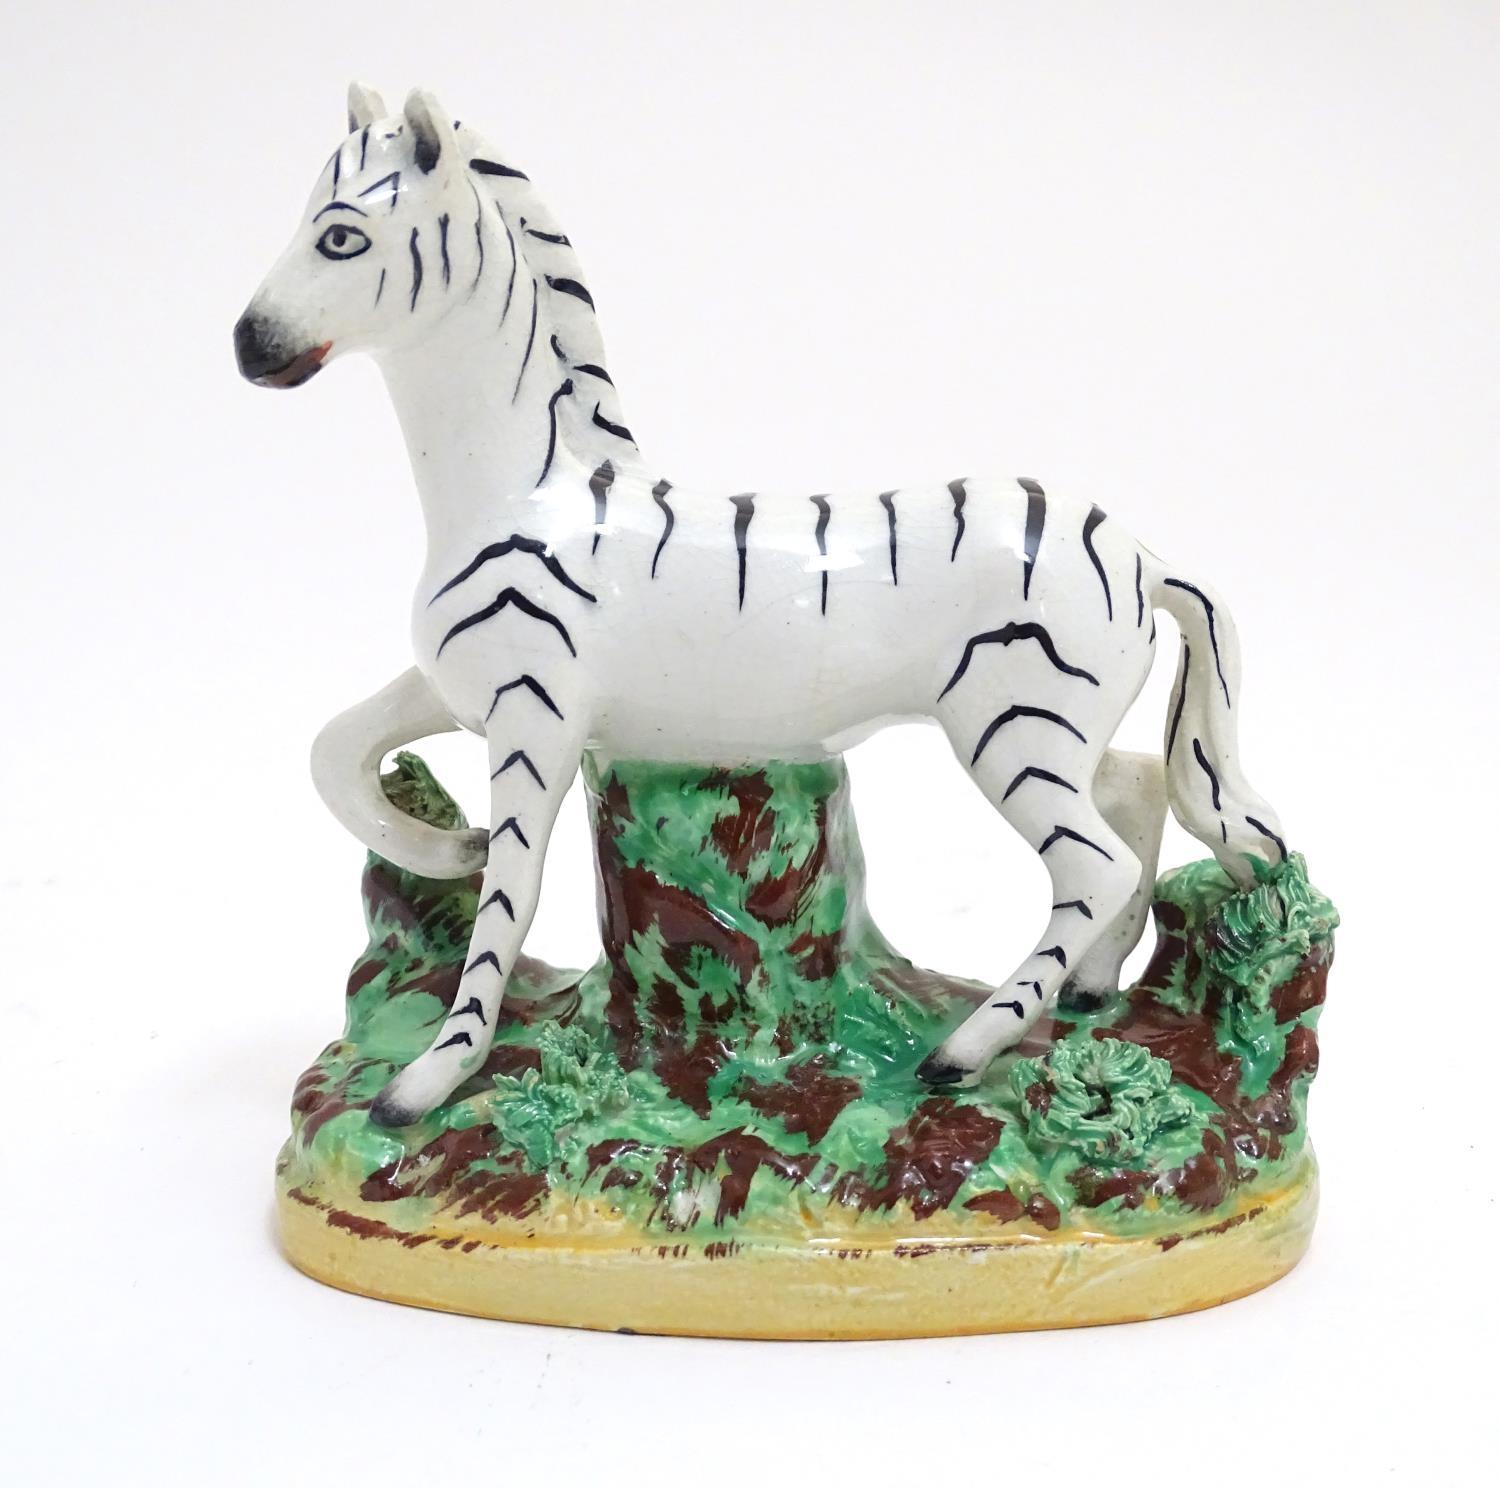 A Staffordshire figure modelled as a zebra on a naturalistic oval base. Approx. 4 3/4" high Please